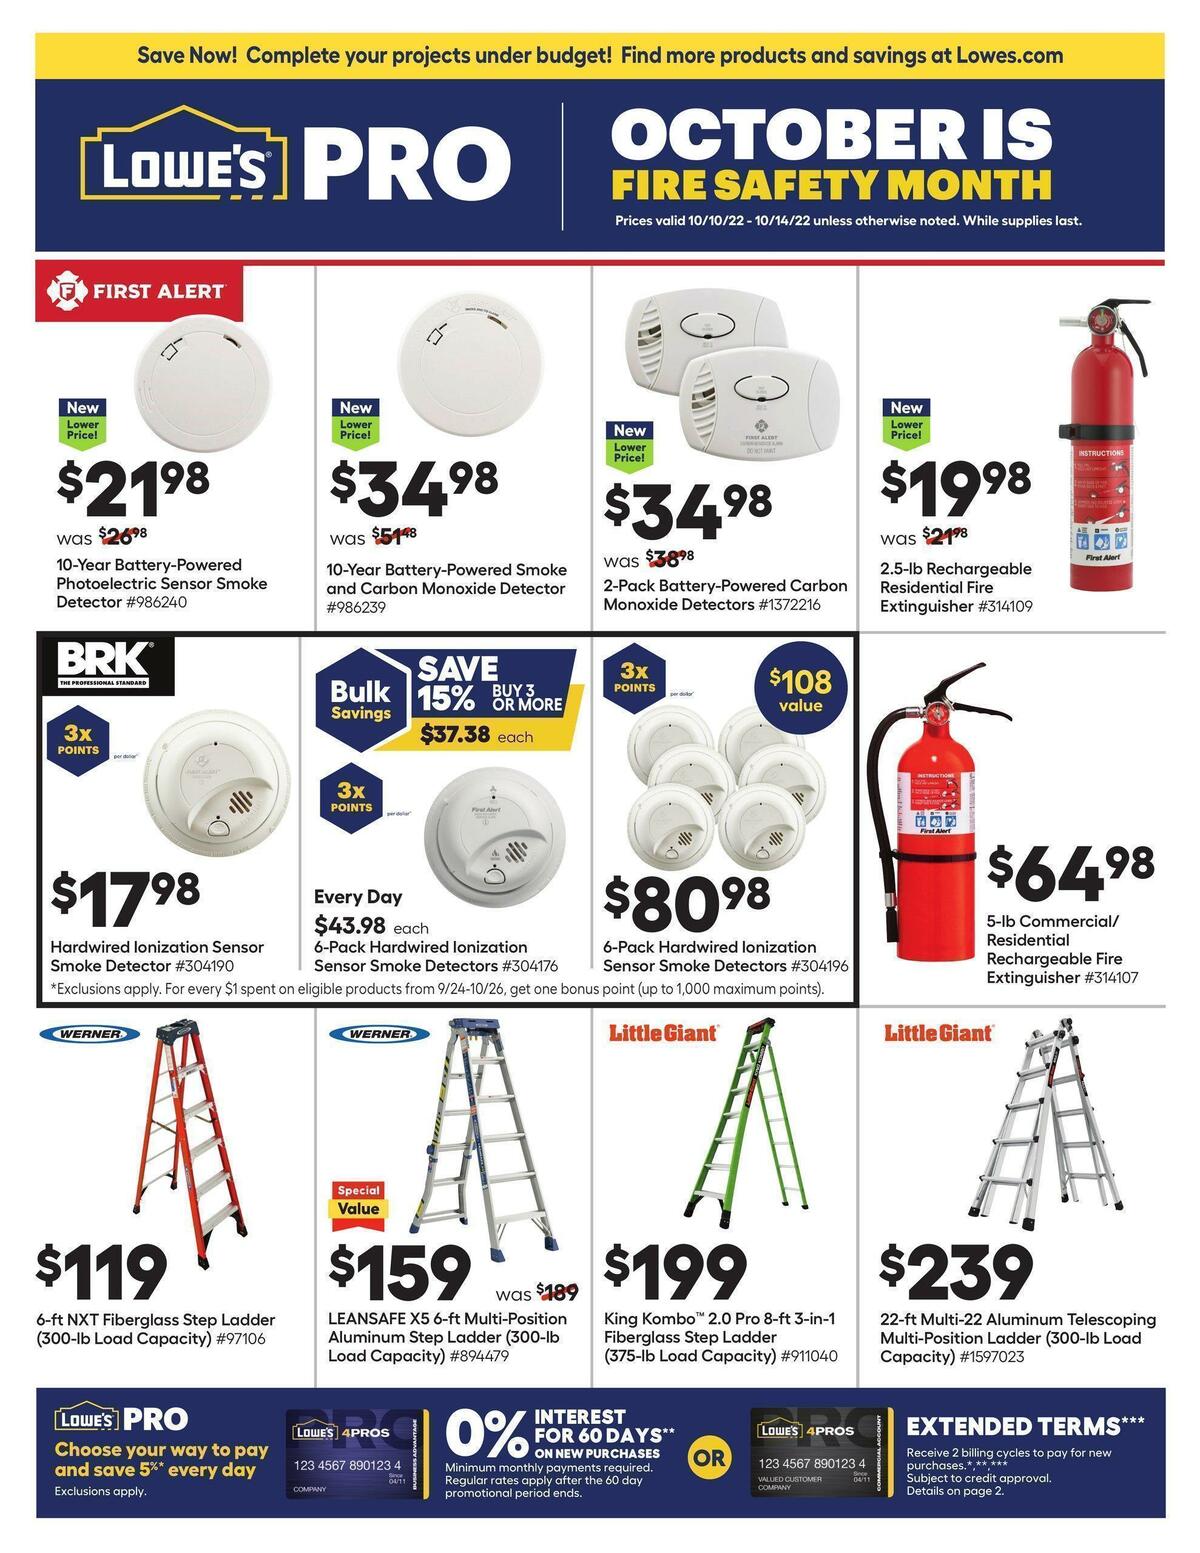 Lowe's Pro Ad - Fire Safety Weekly Ad from October 10